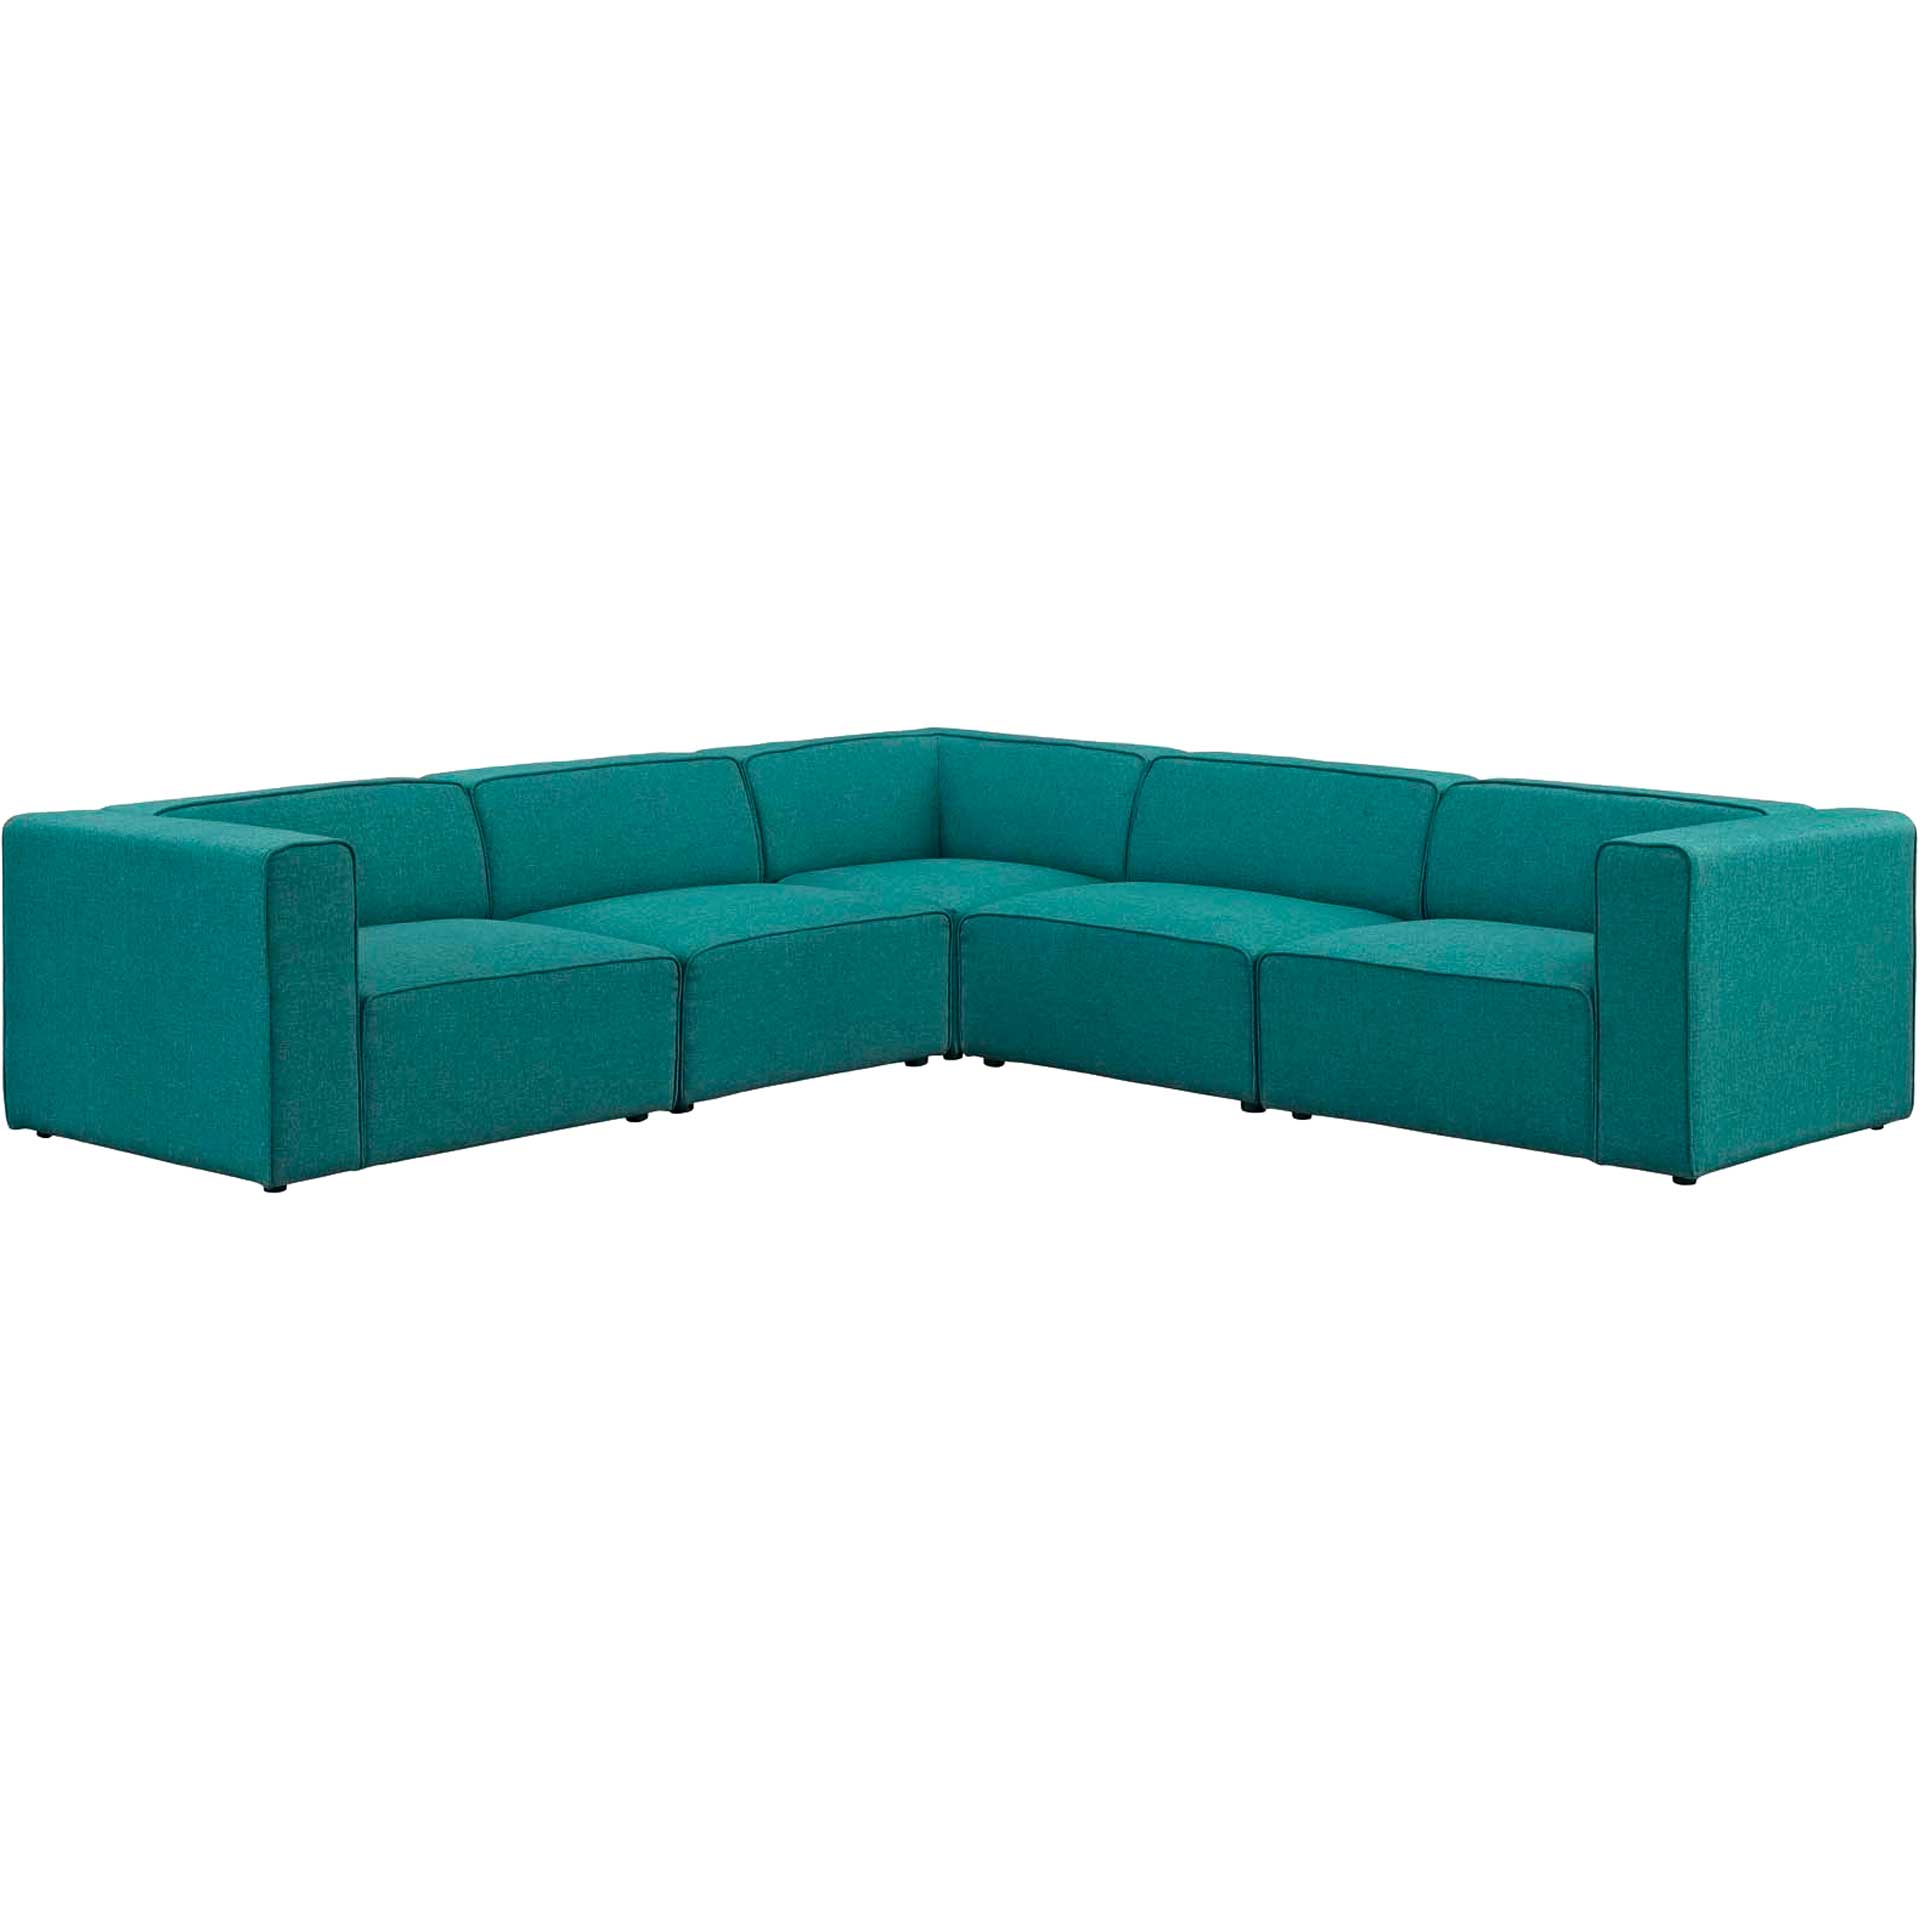 Maisie 5 Piece L-Shaped Sectional Sofa Teal